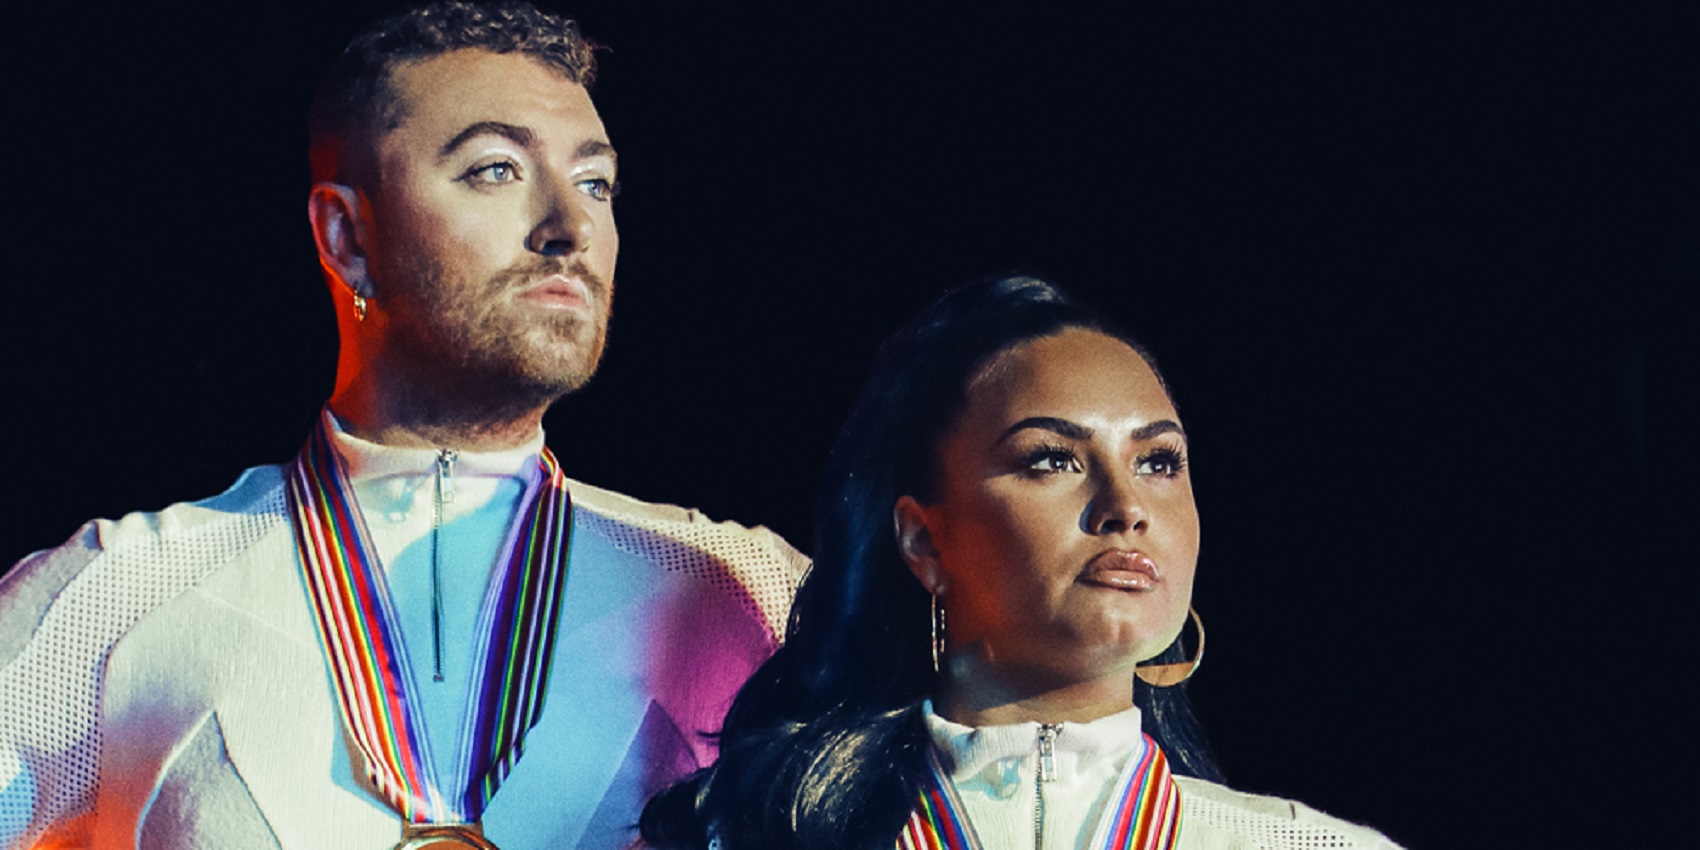 Watch: New Song and Music Video From Sam Smith and Demi Lovato – ‘I’m Ready’